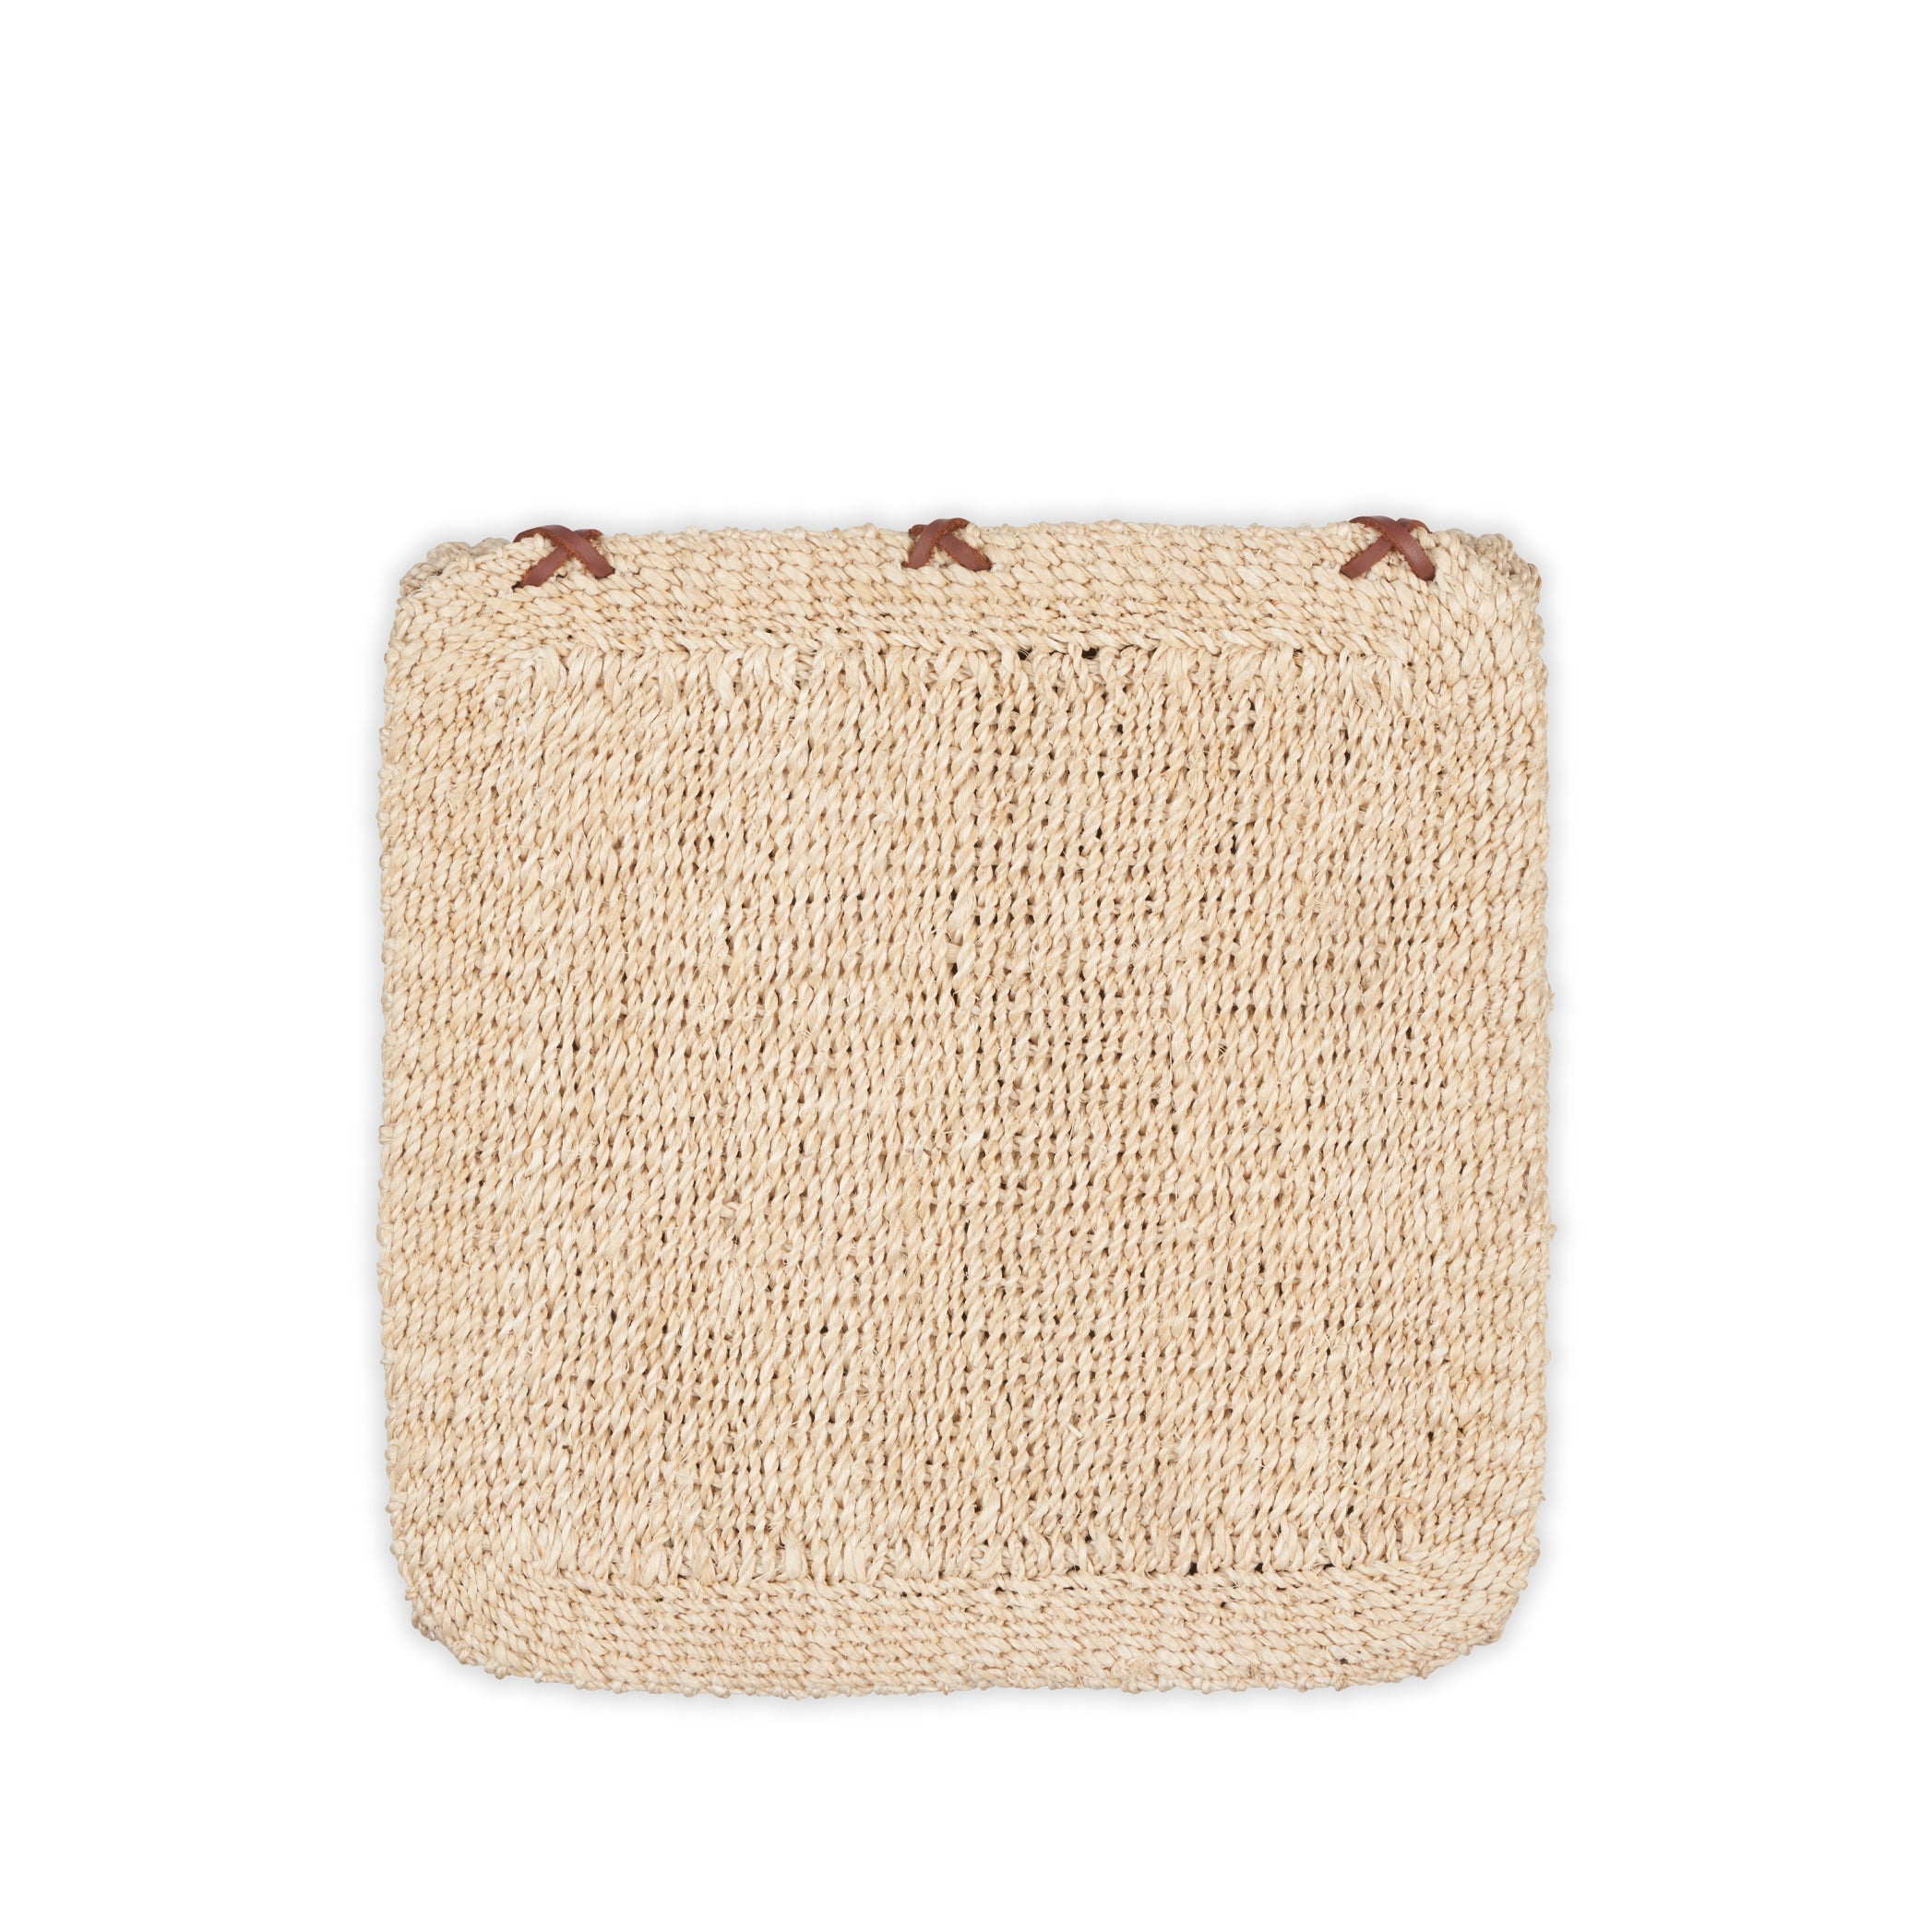 Abaca Woven Cutlery Box With a Lid in Cream